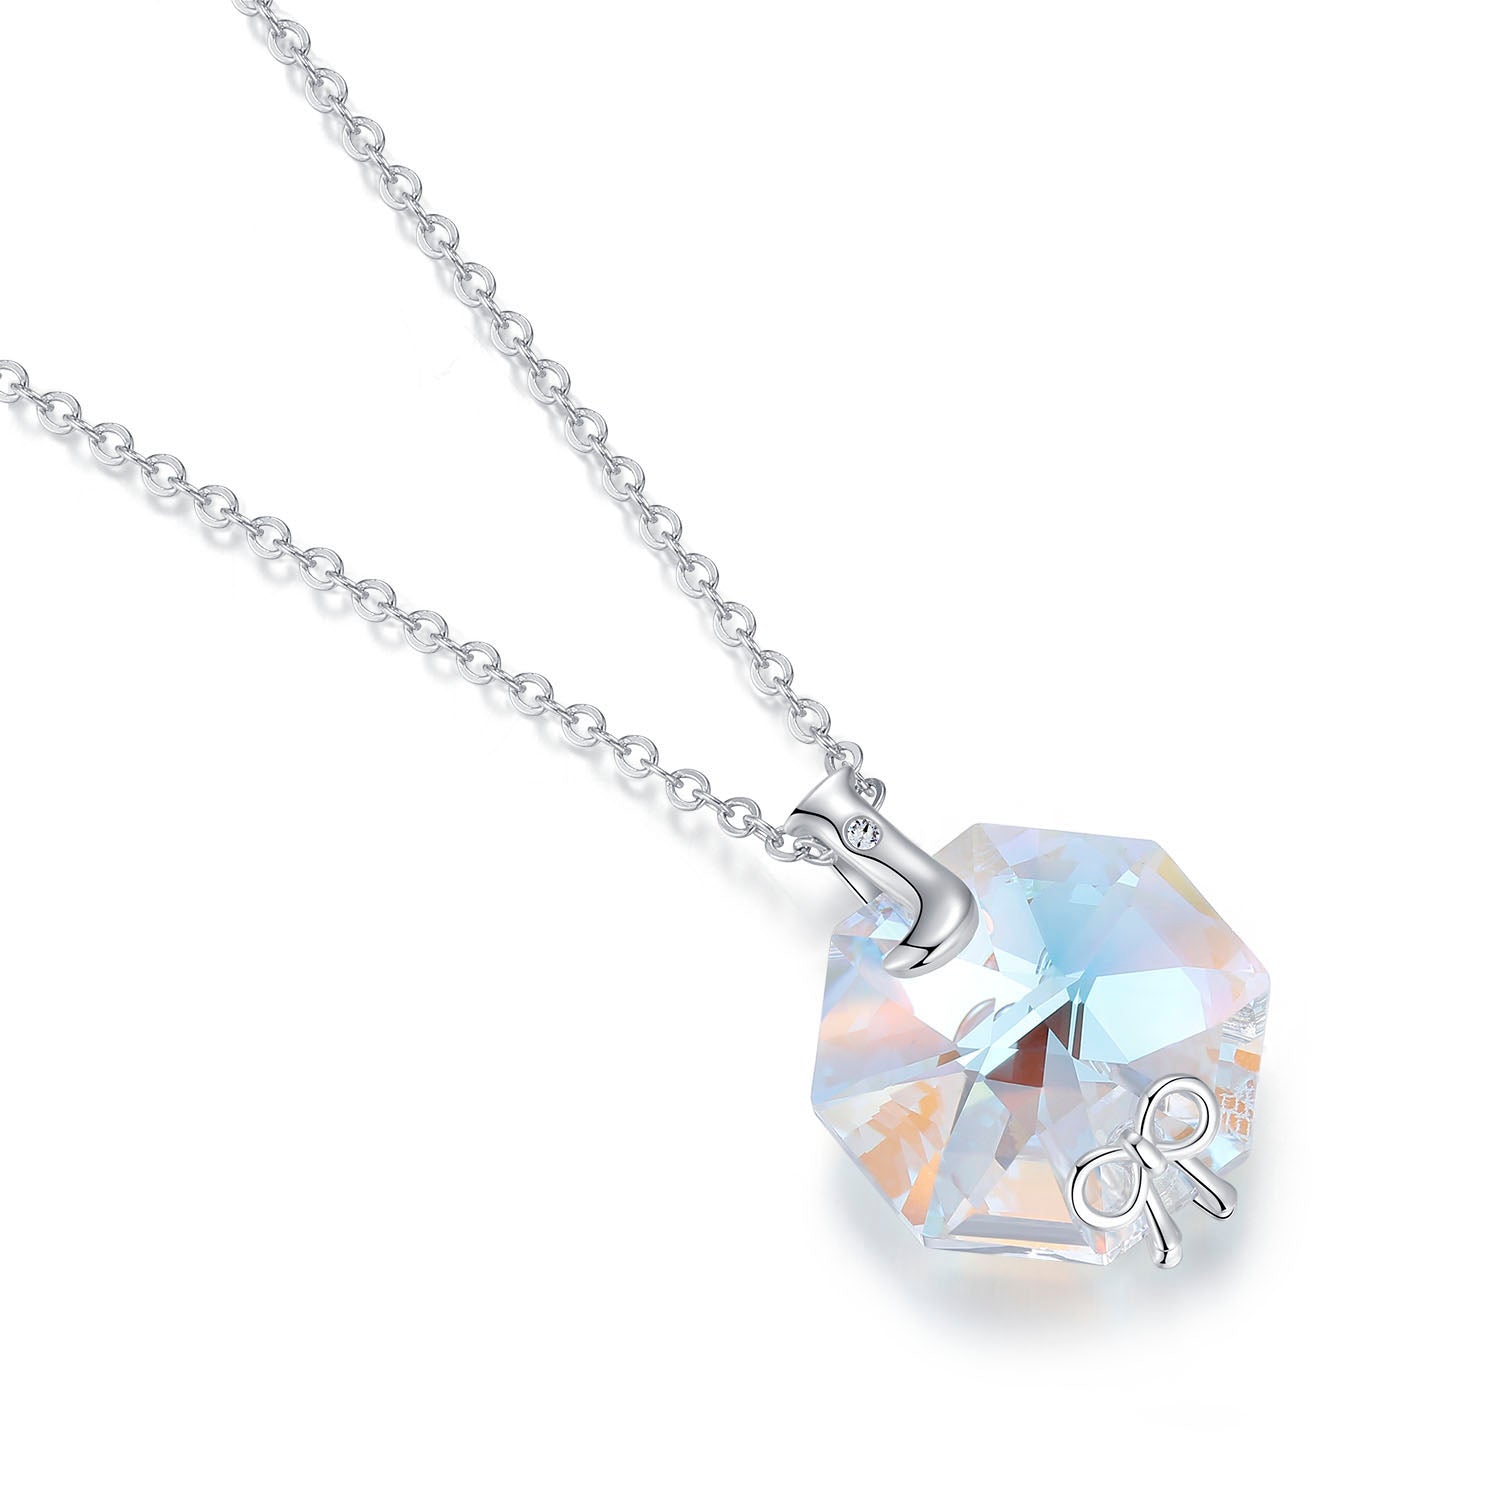 Planet J 925 Sterling Silver Hexagon Small Bow Pendant Necklace with Swarovski Elements Crystals